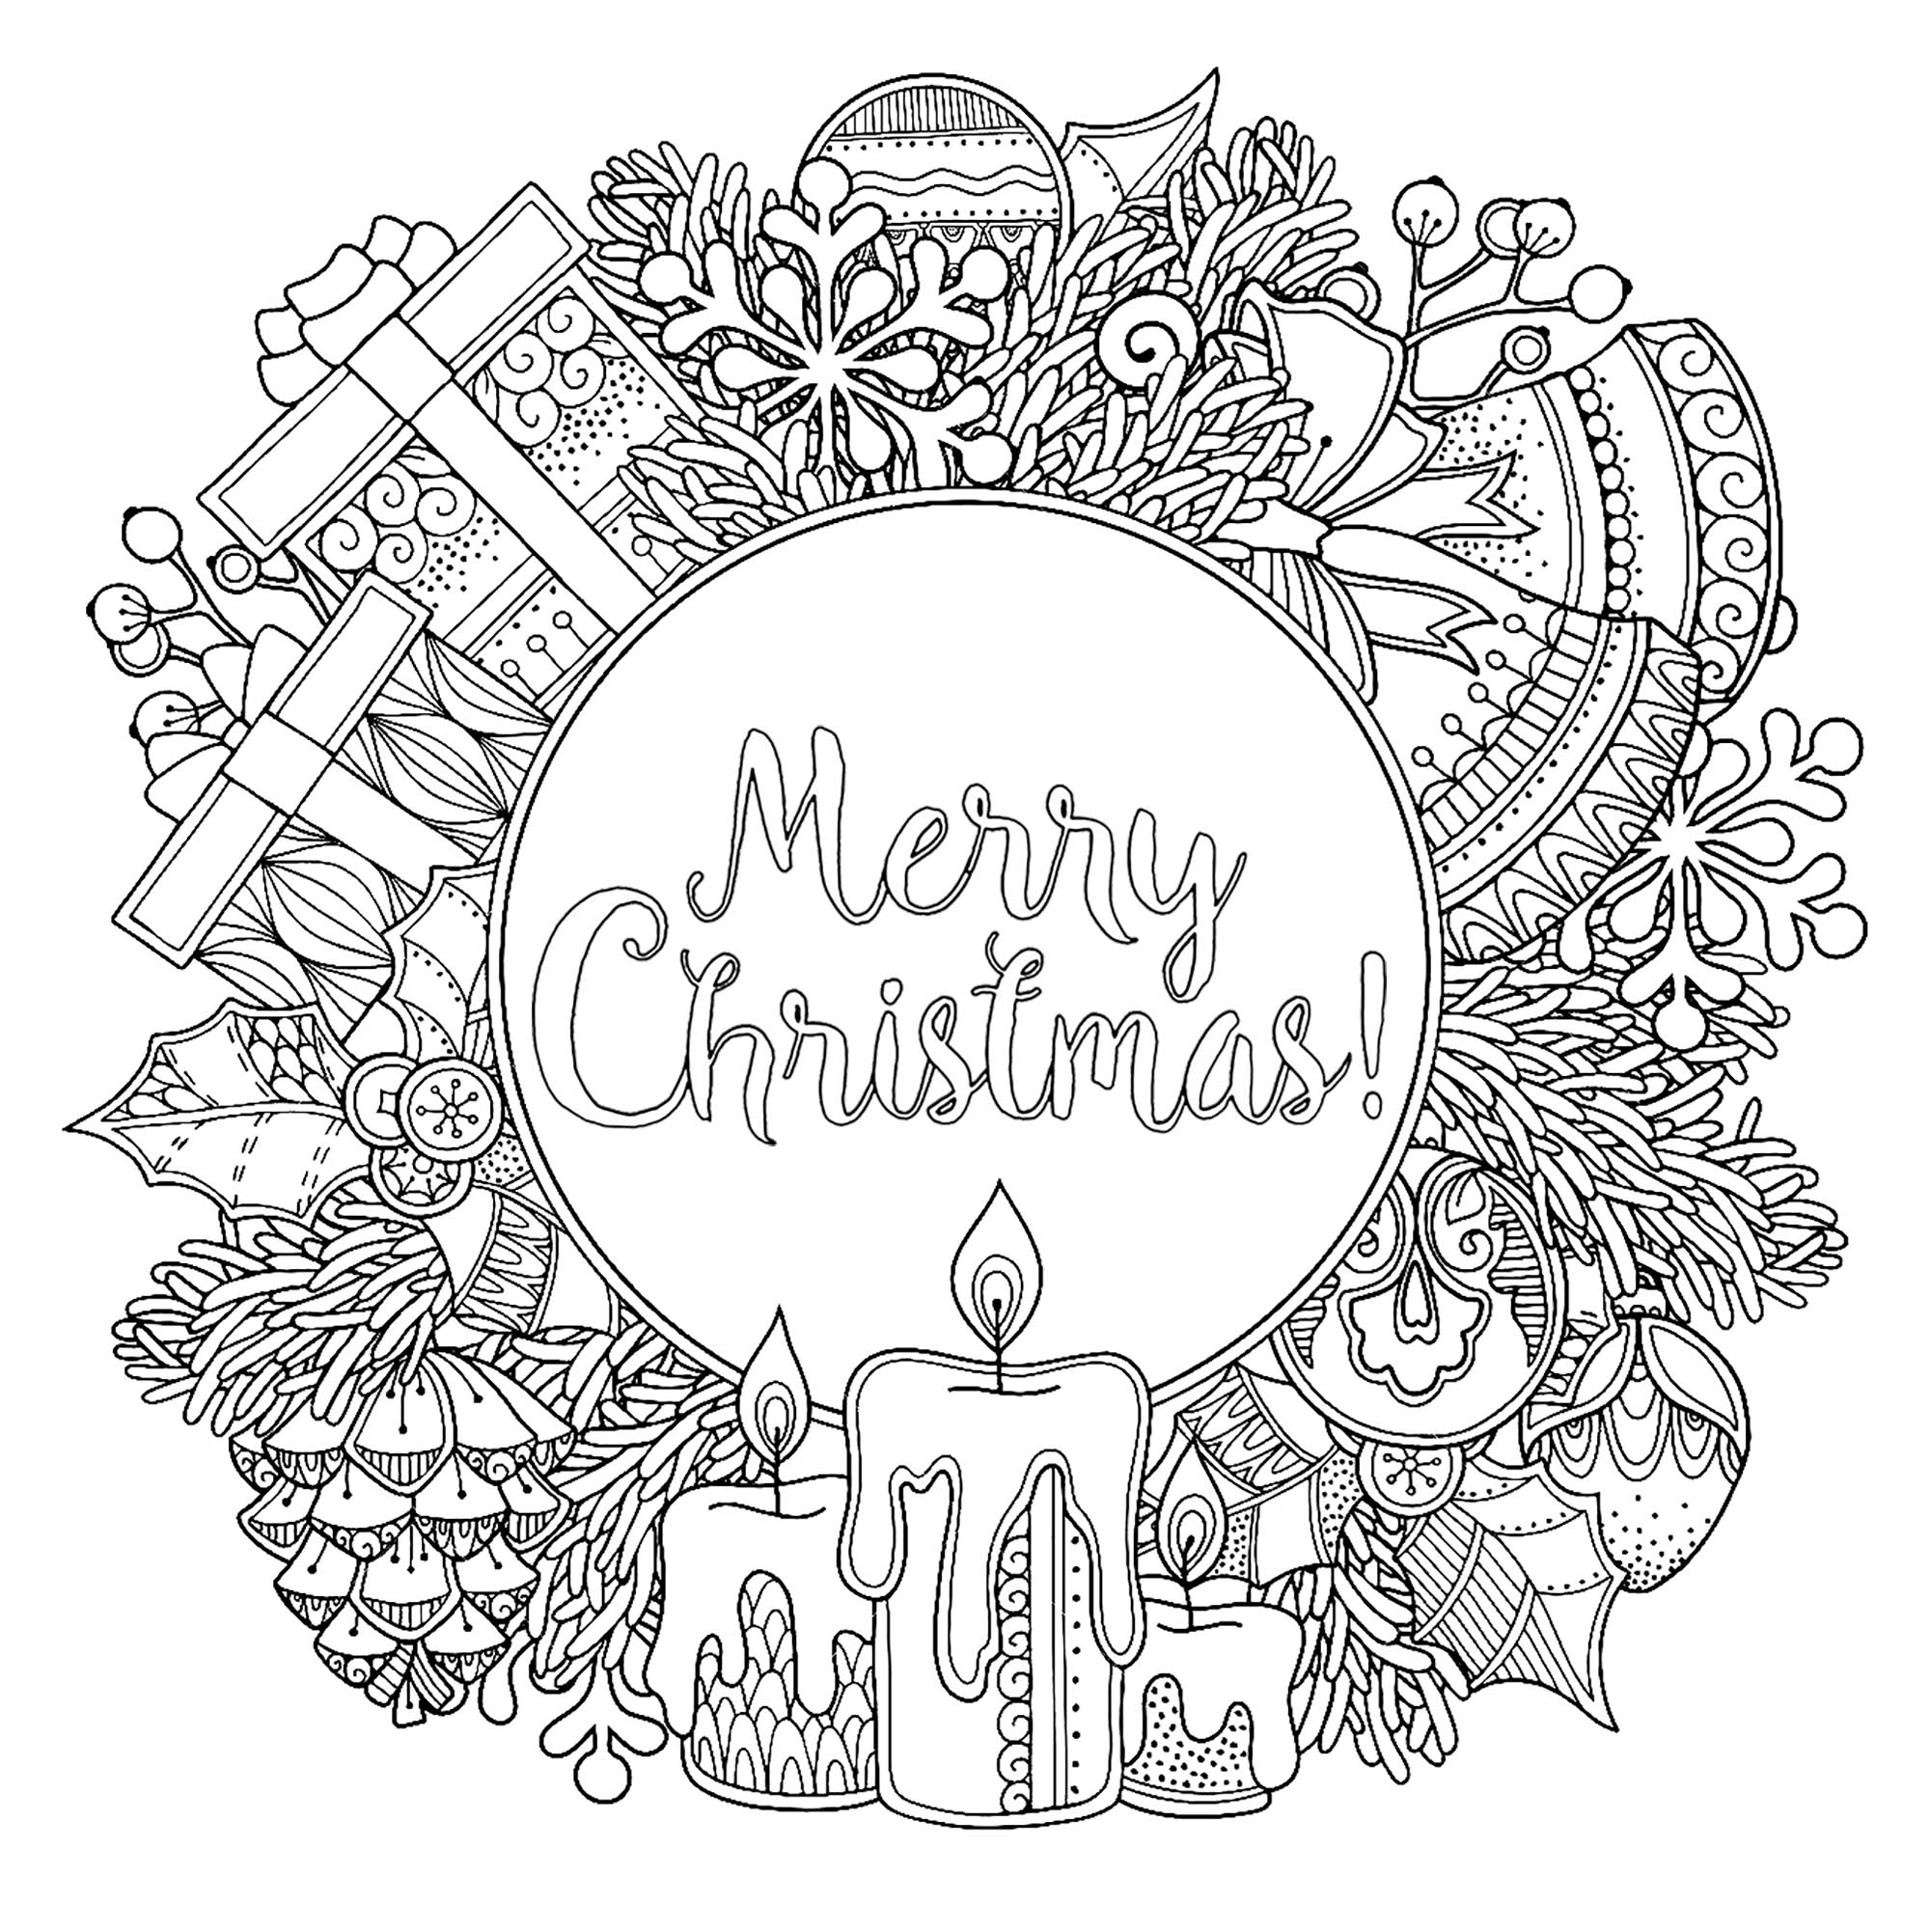 Doodl Christmas wreath - Christmas Adult Coloring Pages